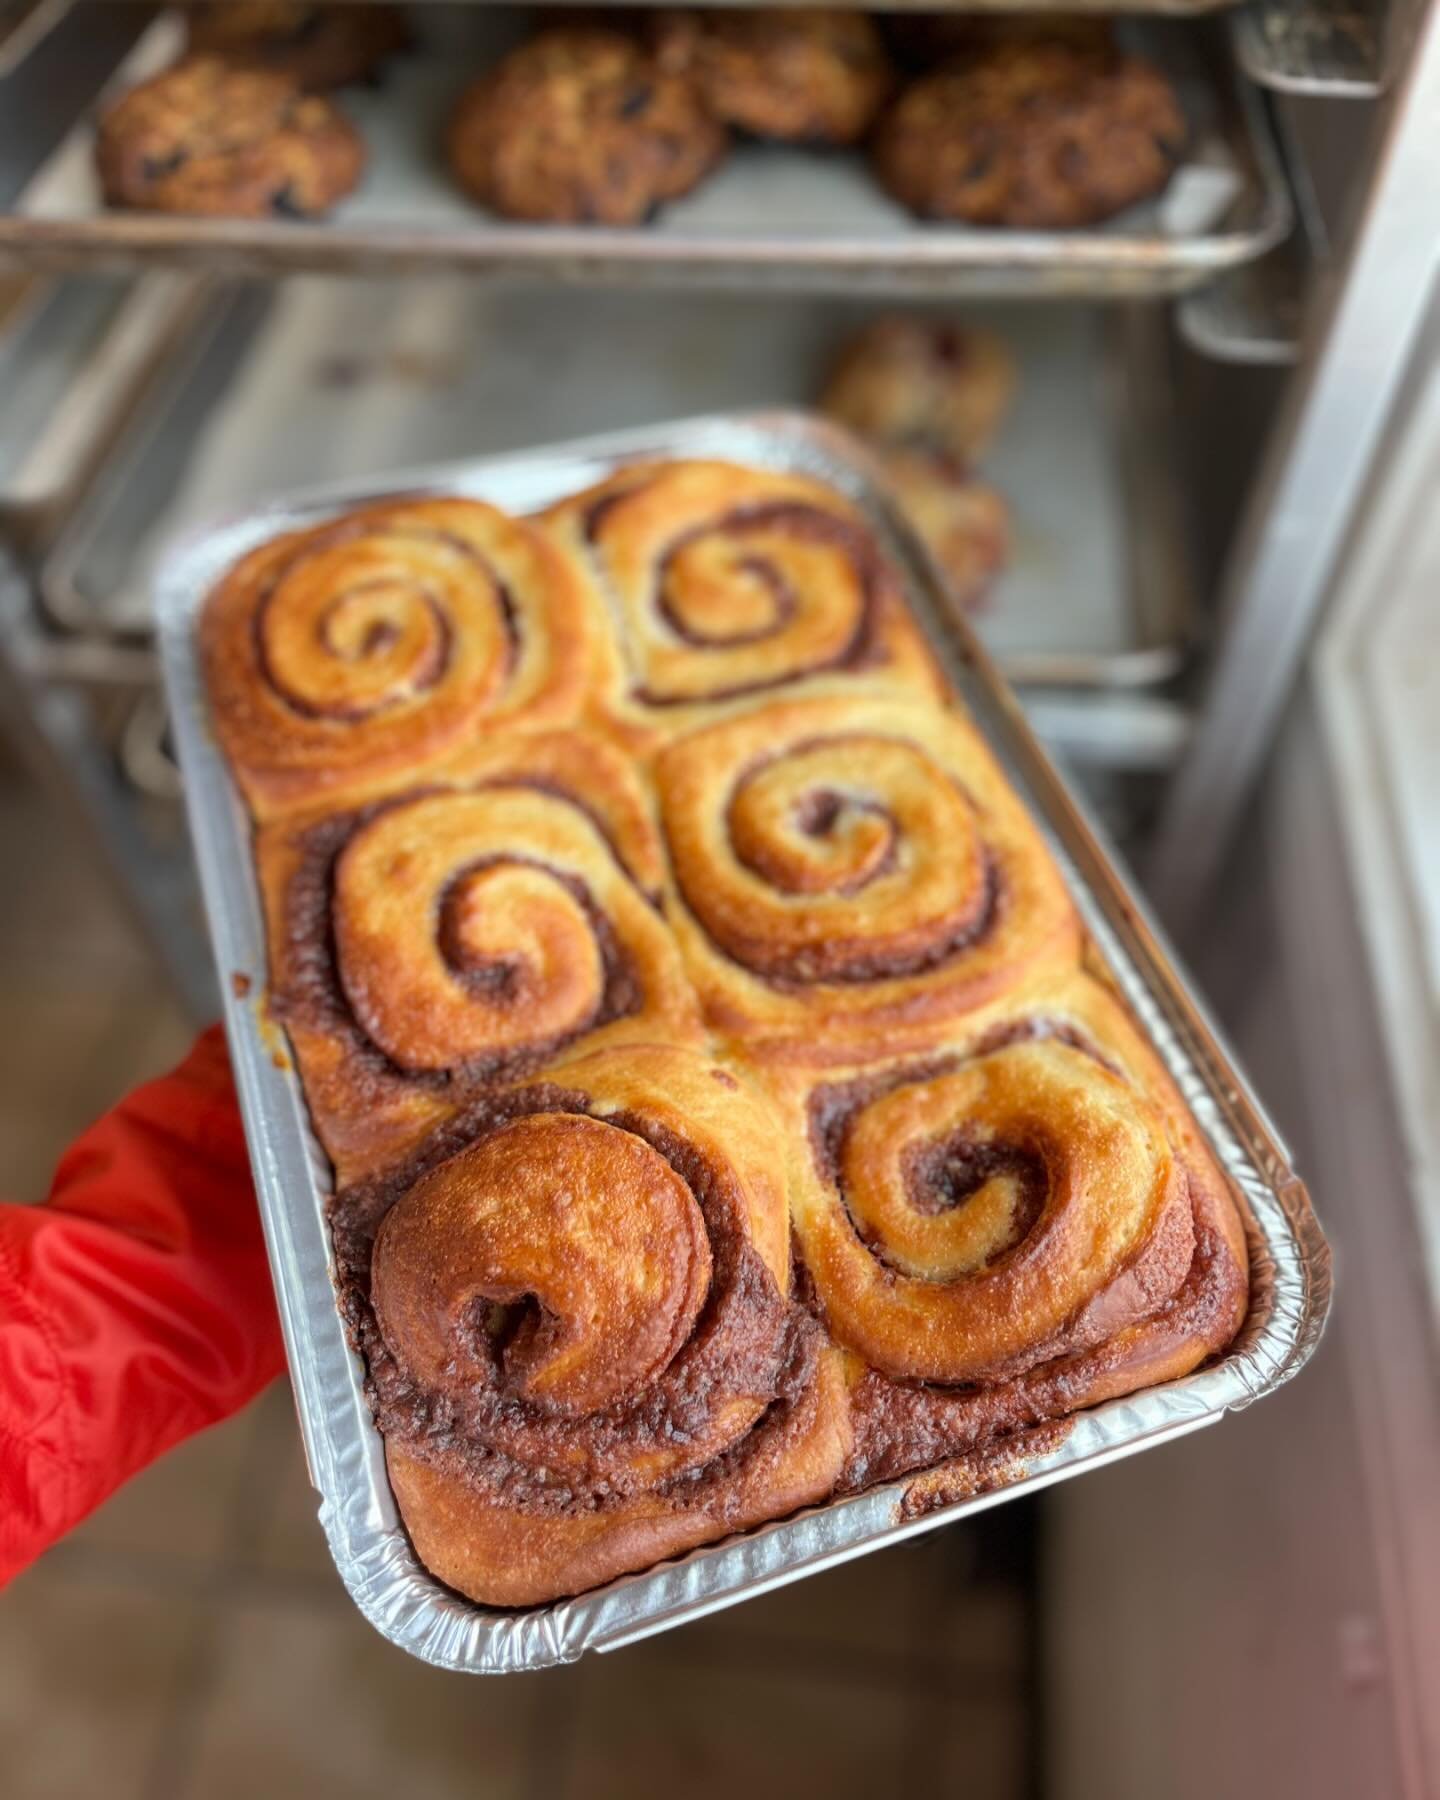 Voila! You made cinnamon buns for mom that&rsquo;s so sweet! I mean, we made them but you can take all the credit! These little bundles of joy come with a tub of icing to spread on top.